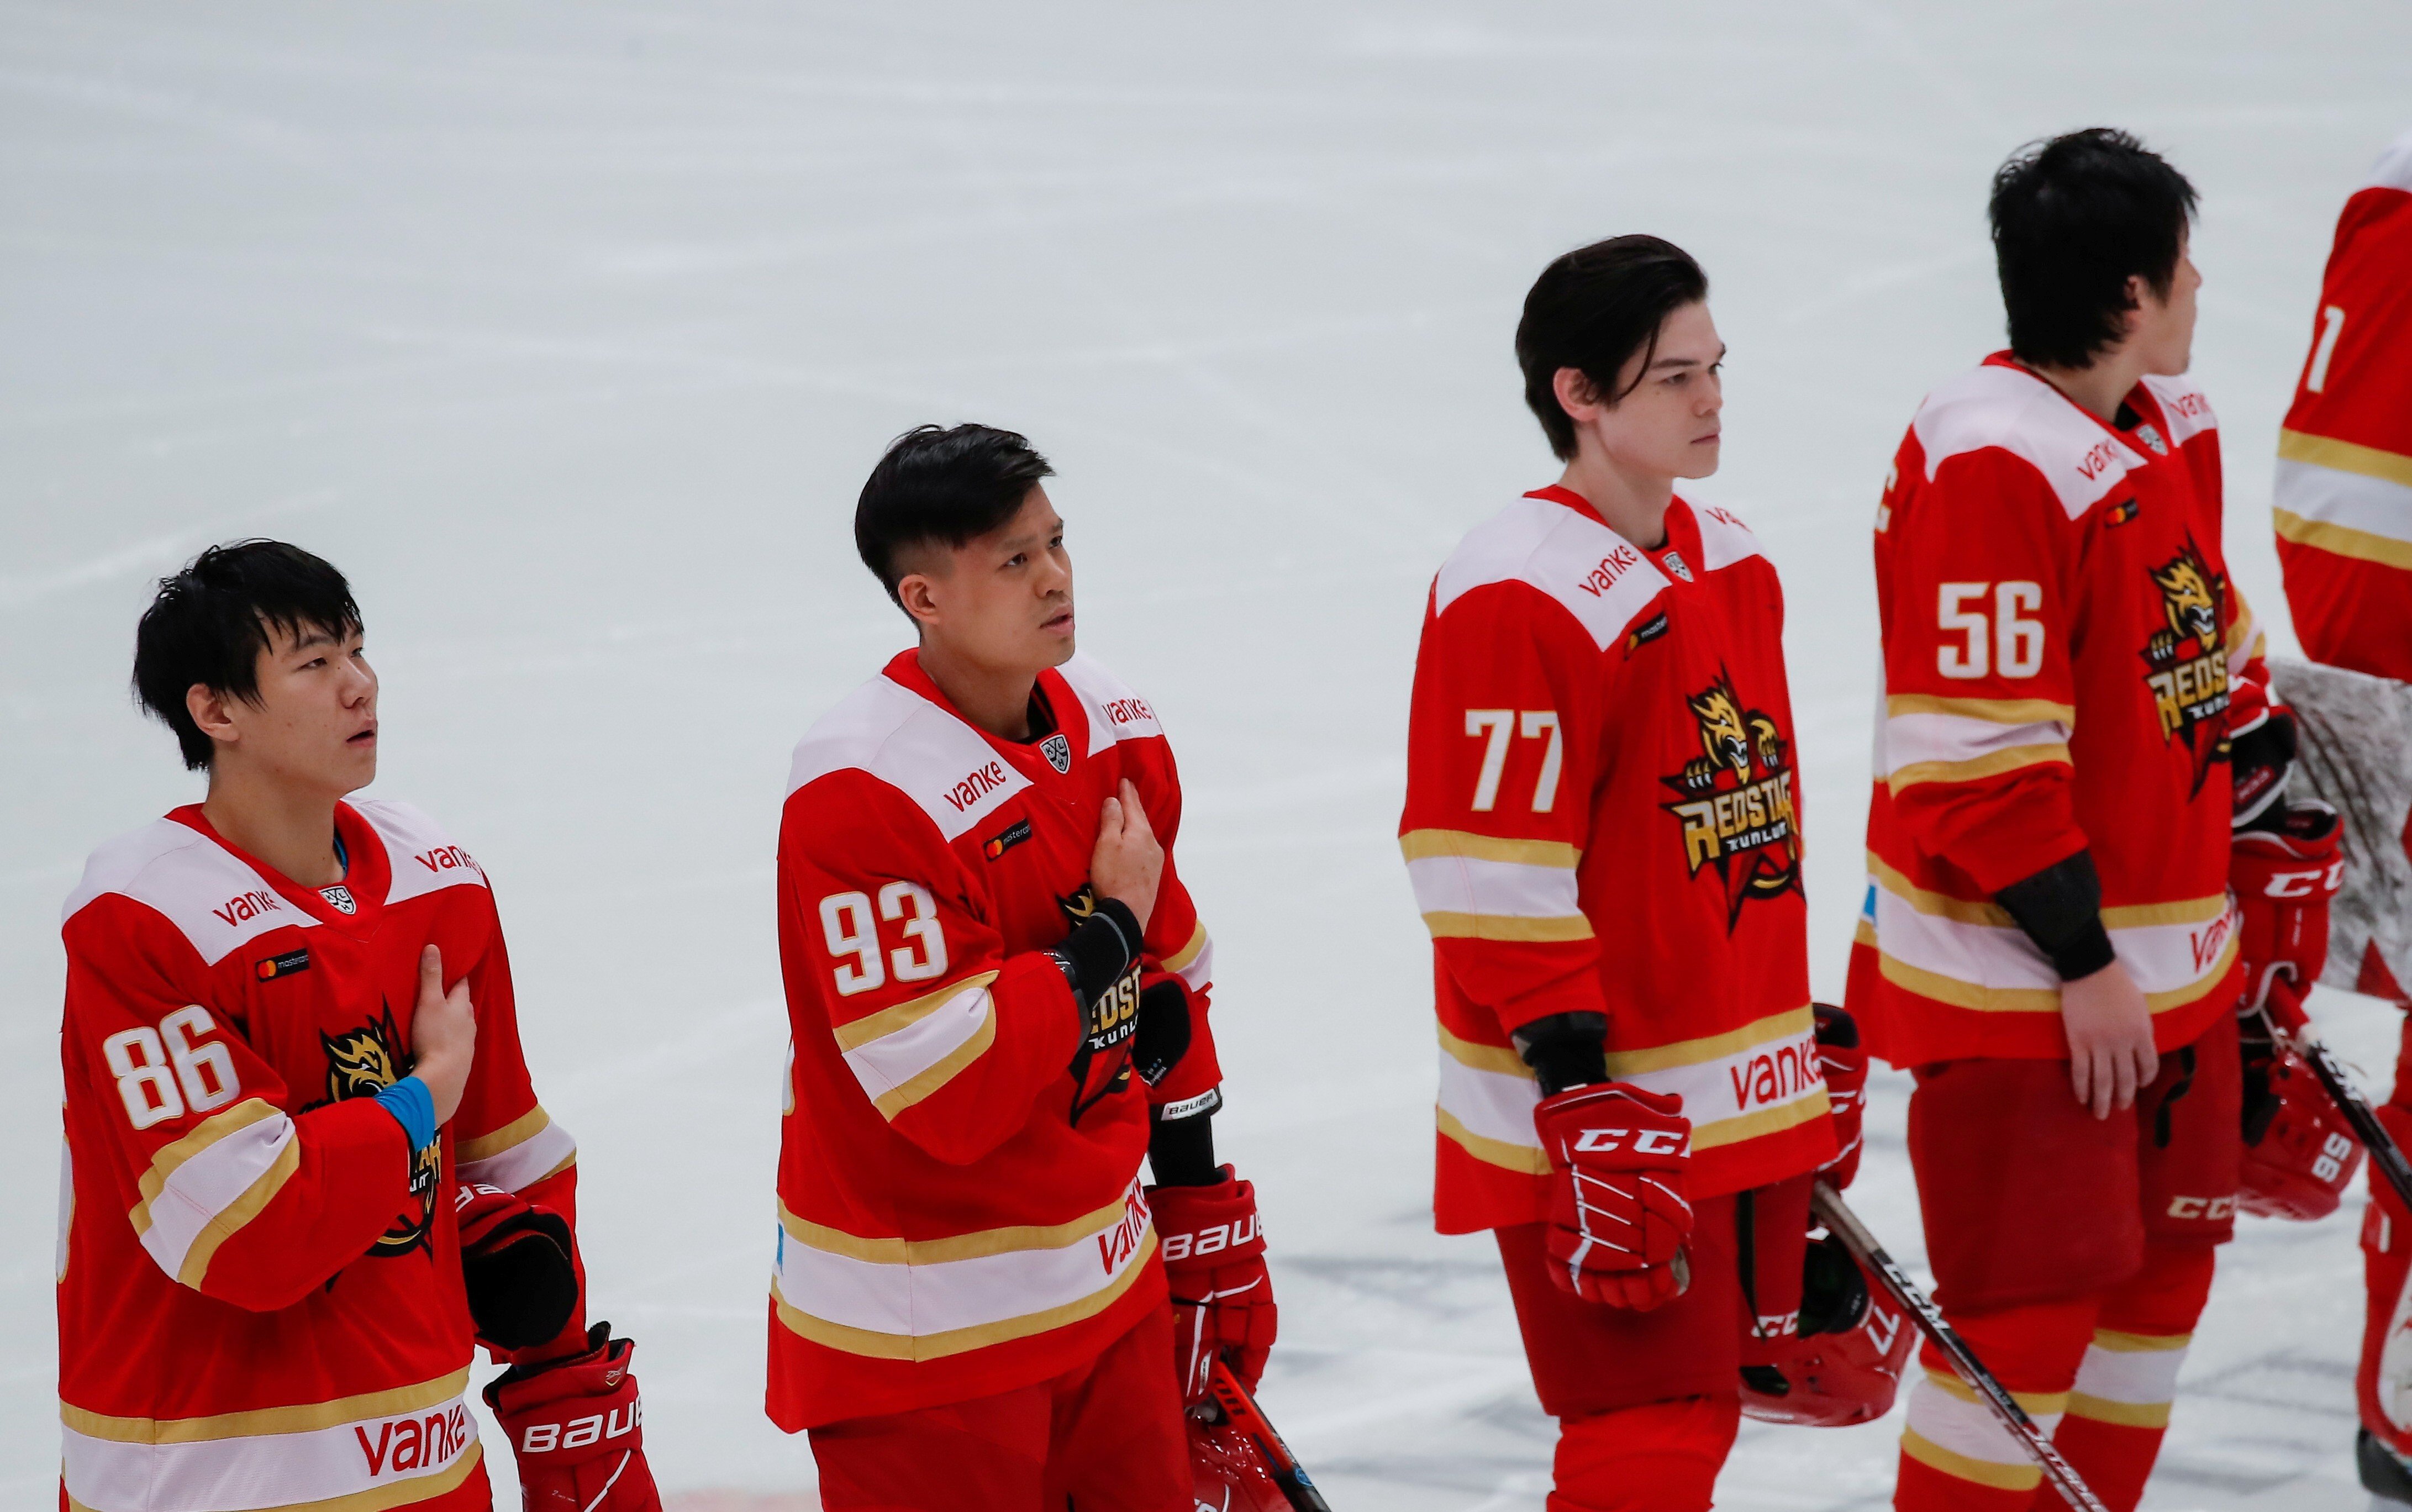 China’s men’s ice hockey team, whose players are currently playing for the Kunlun Red Star in the KHL, are going to get a rude awakening against NHL players come February in Beijing. Photo: Reuters